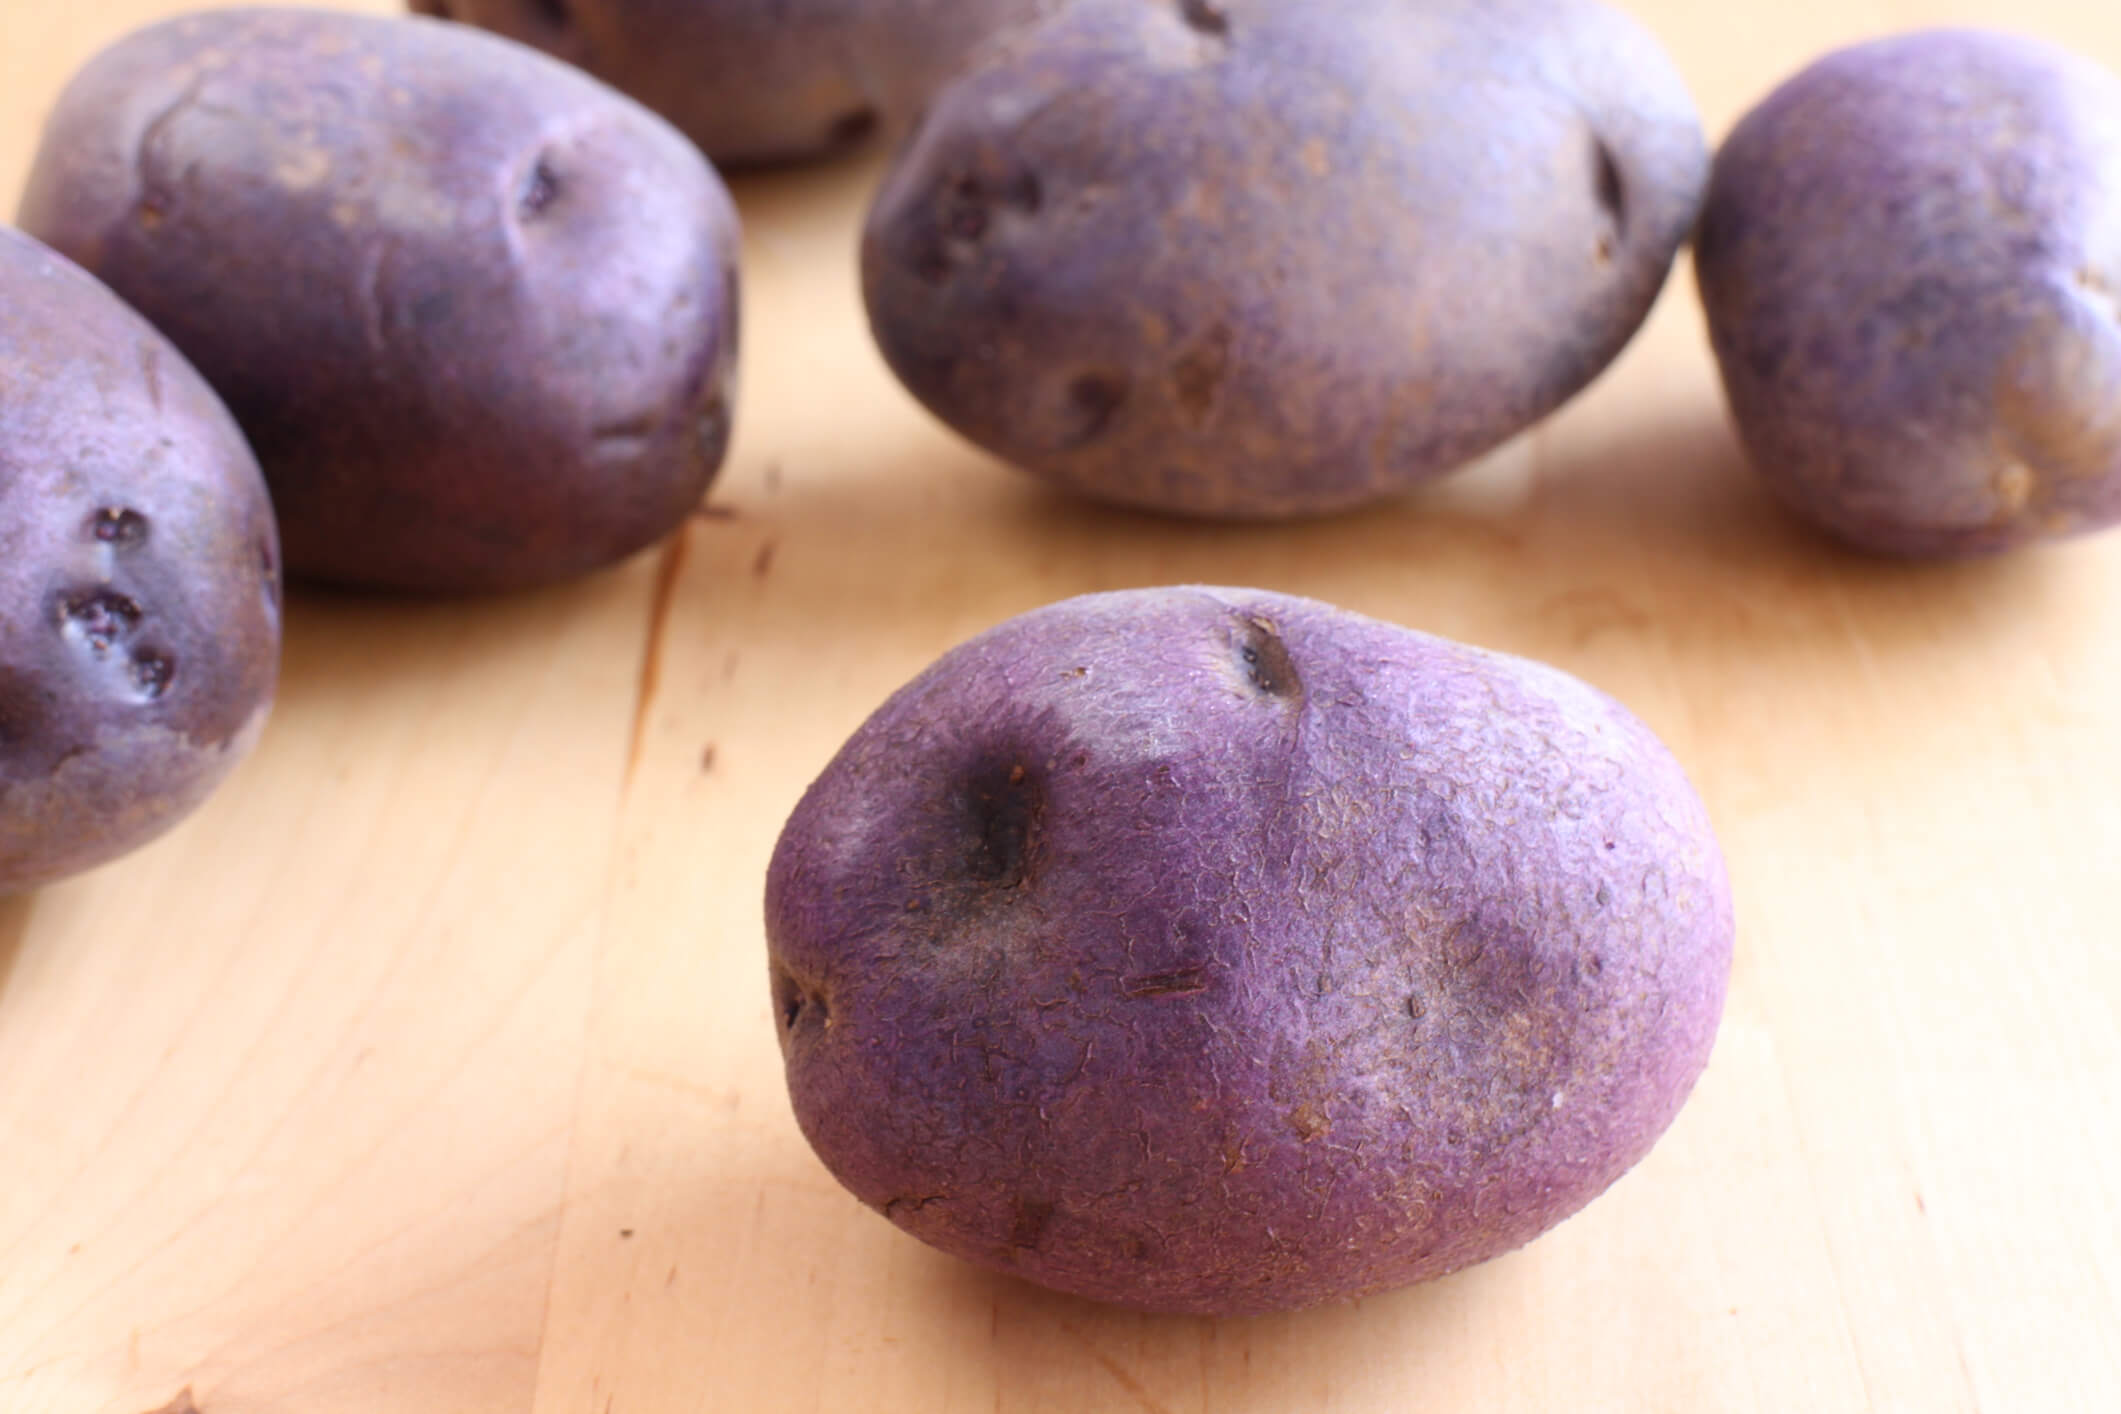 Foods for Cancer Prevention: Purple potatoes